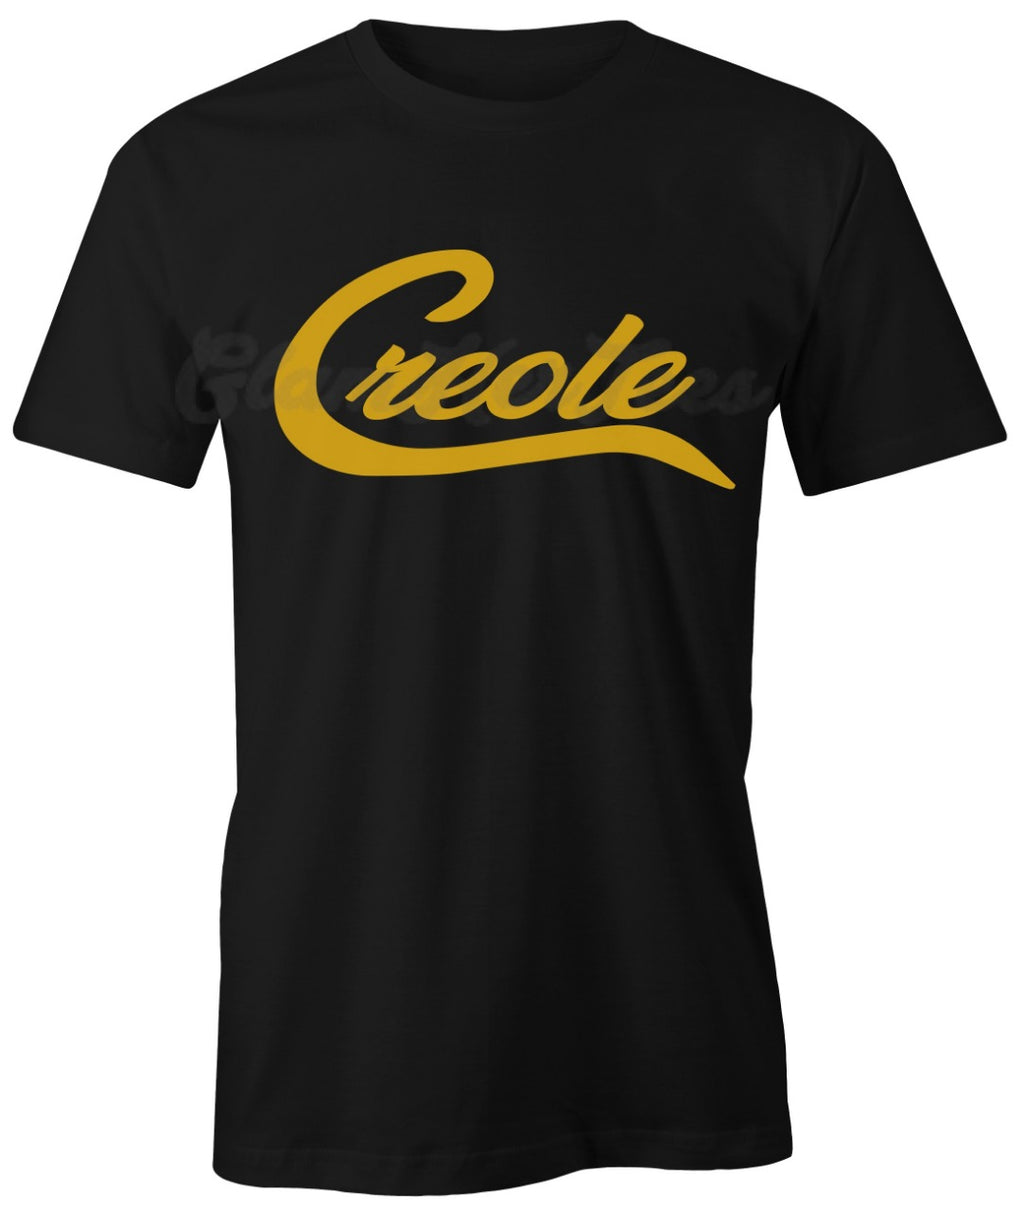 Gold Tail Creole T-shirt